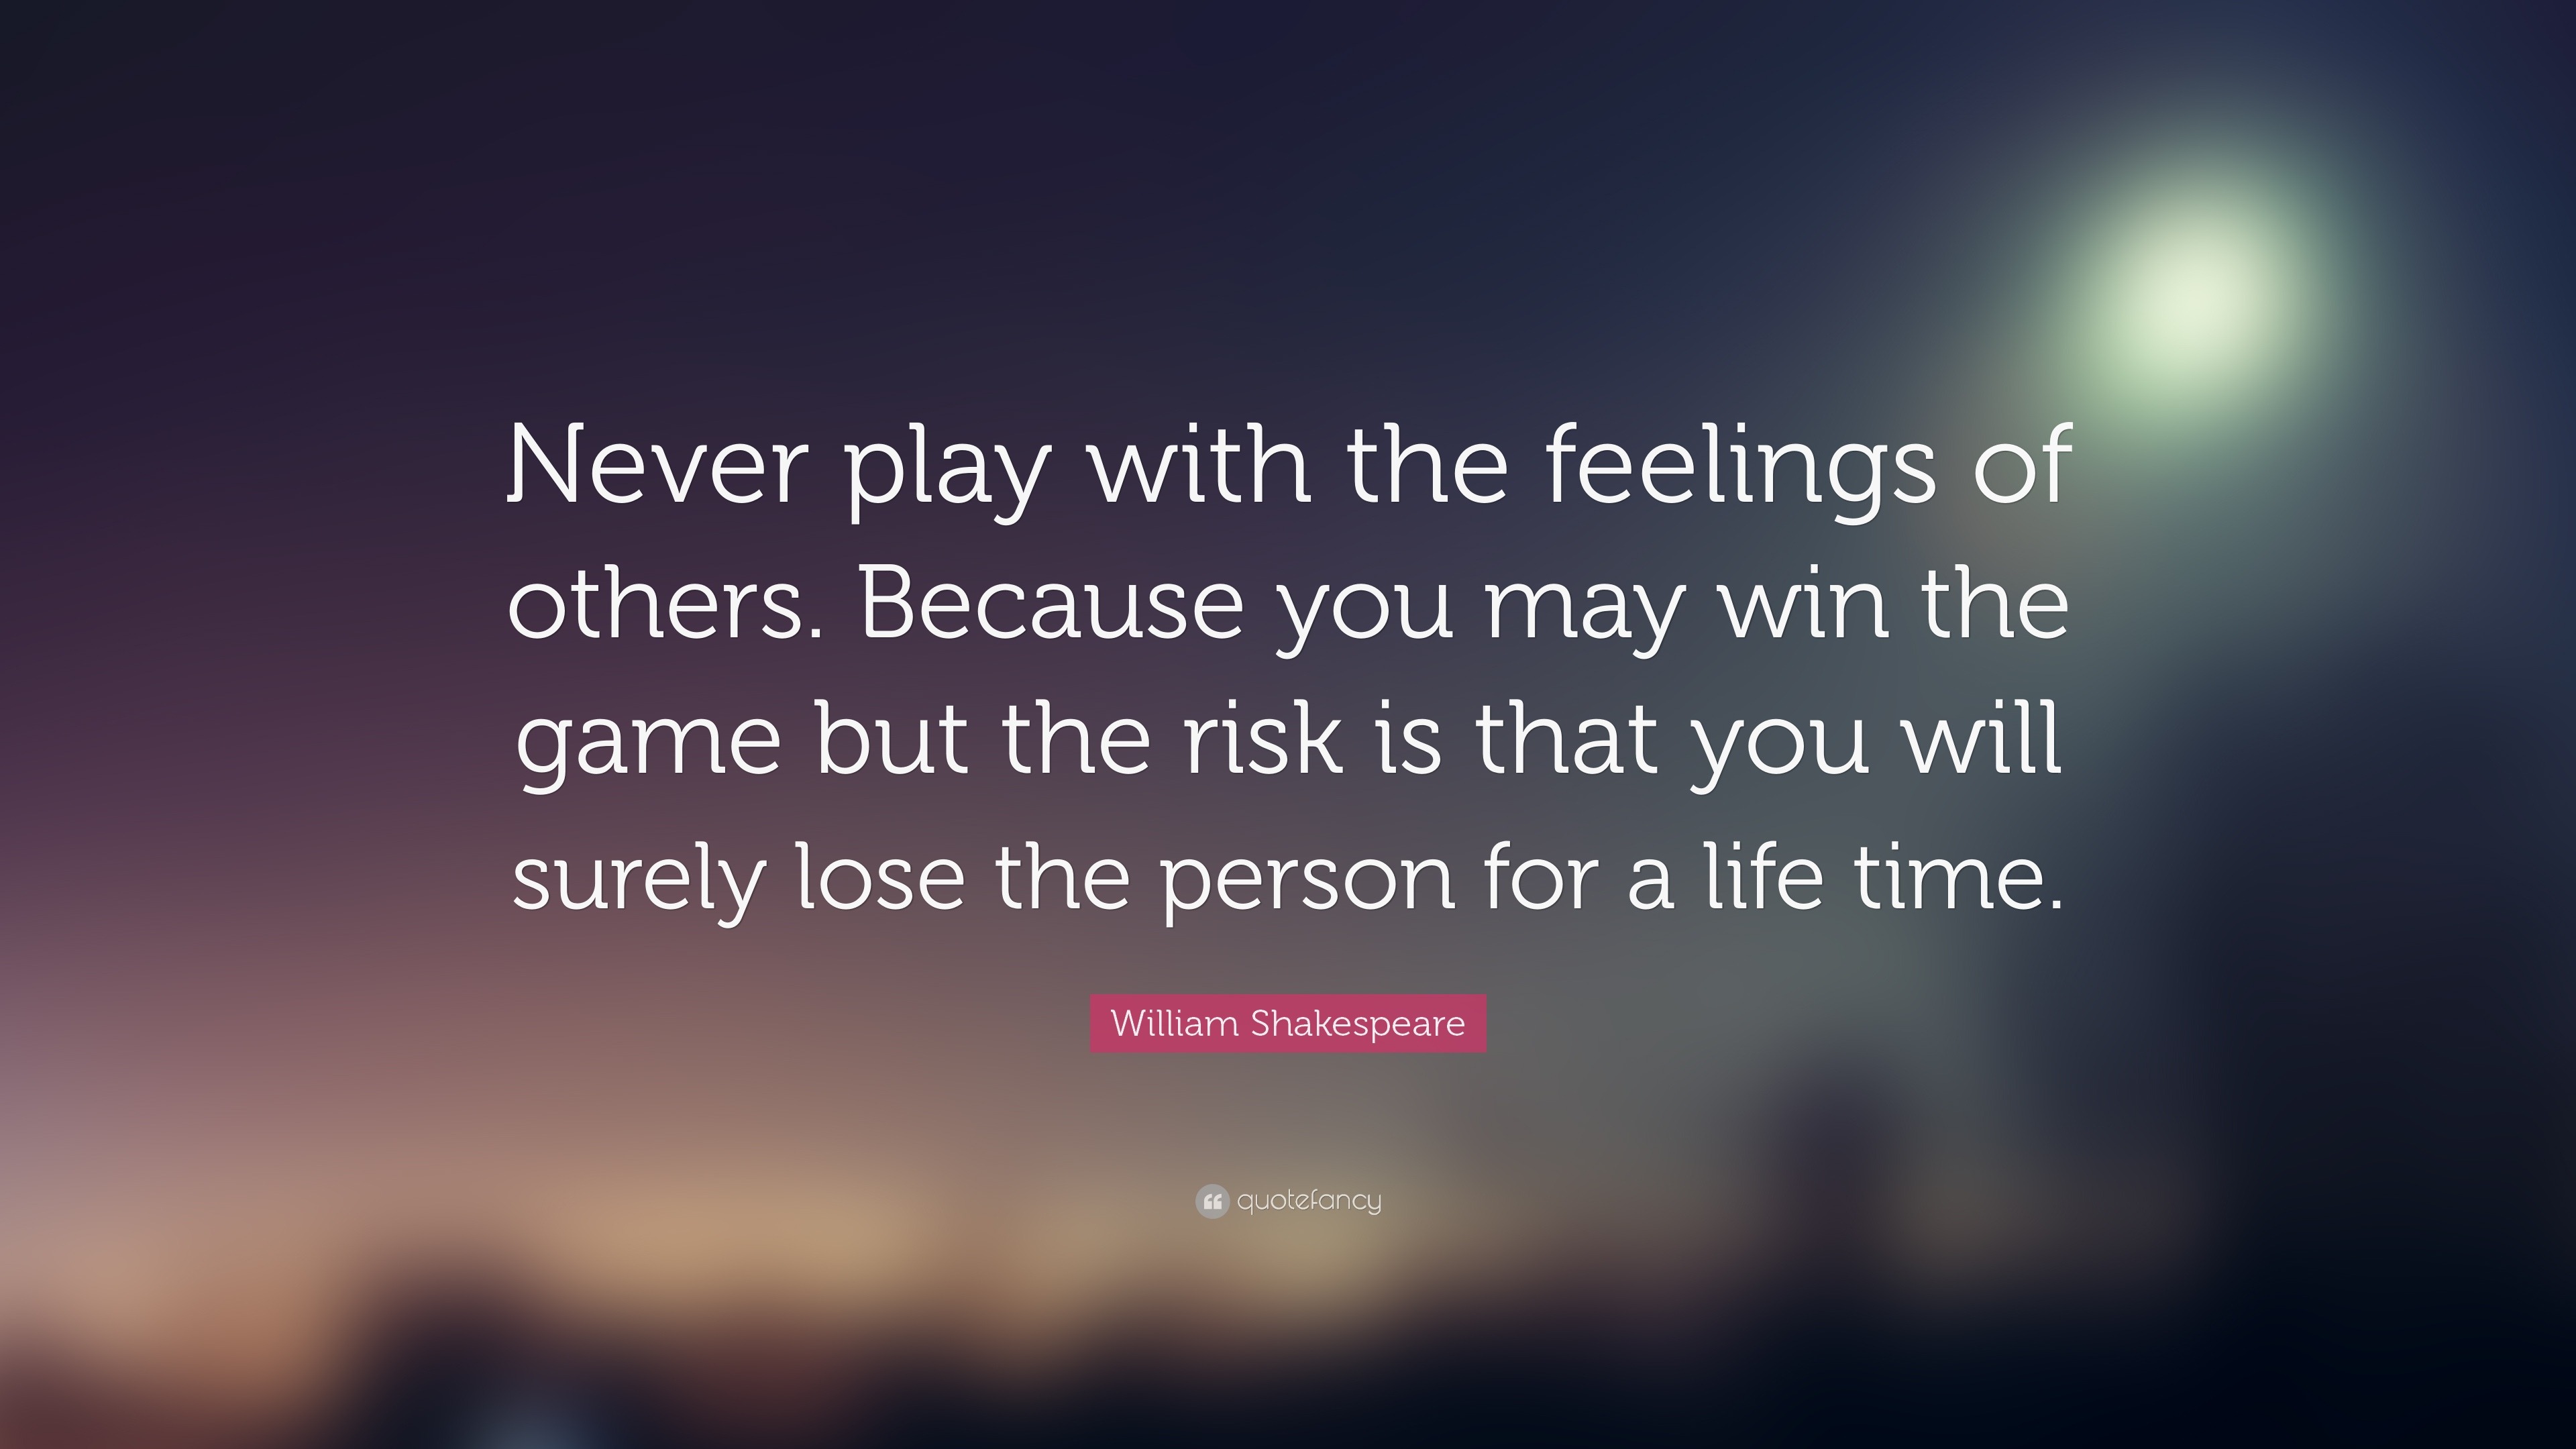 45362 William Shakespeare Quote Never play with the feelings of others